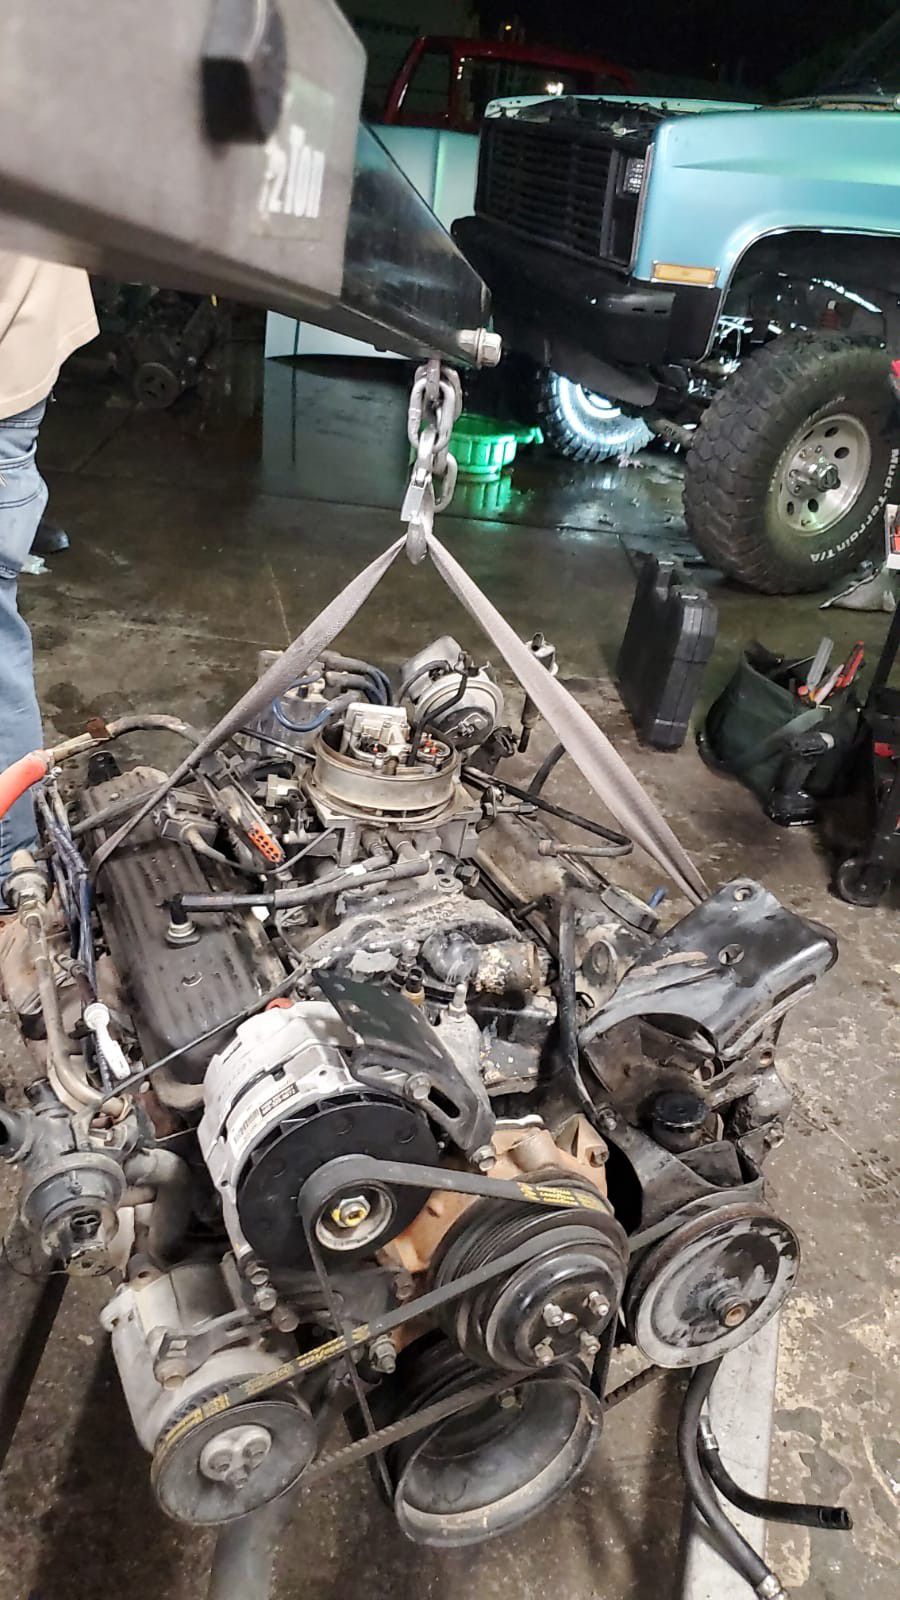 1987 5.7 engine with 700r4 transmission( rebuilt) update as of now engine is sold just transmission